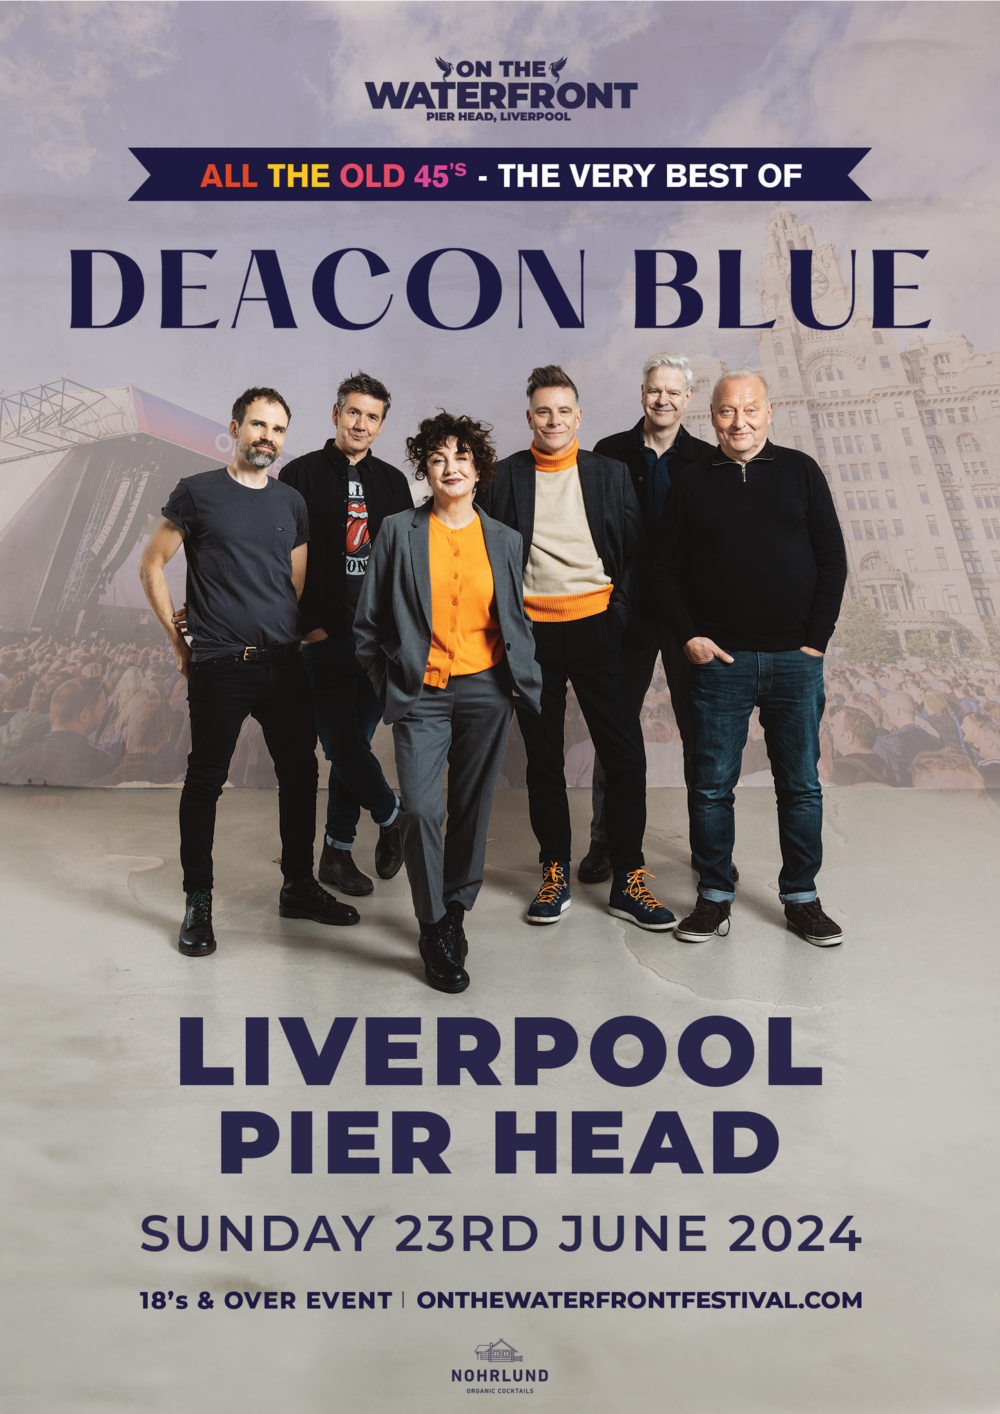 Deacon Blue on the waterfront - The Guide Liverpool